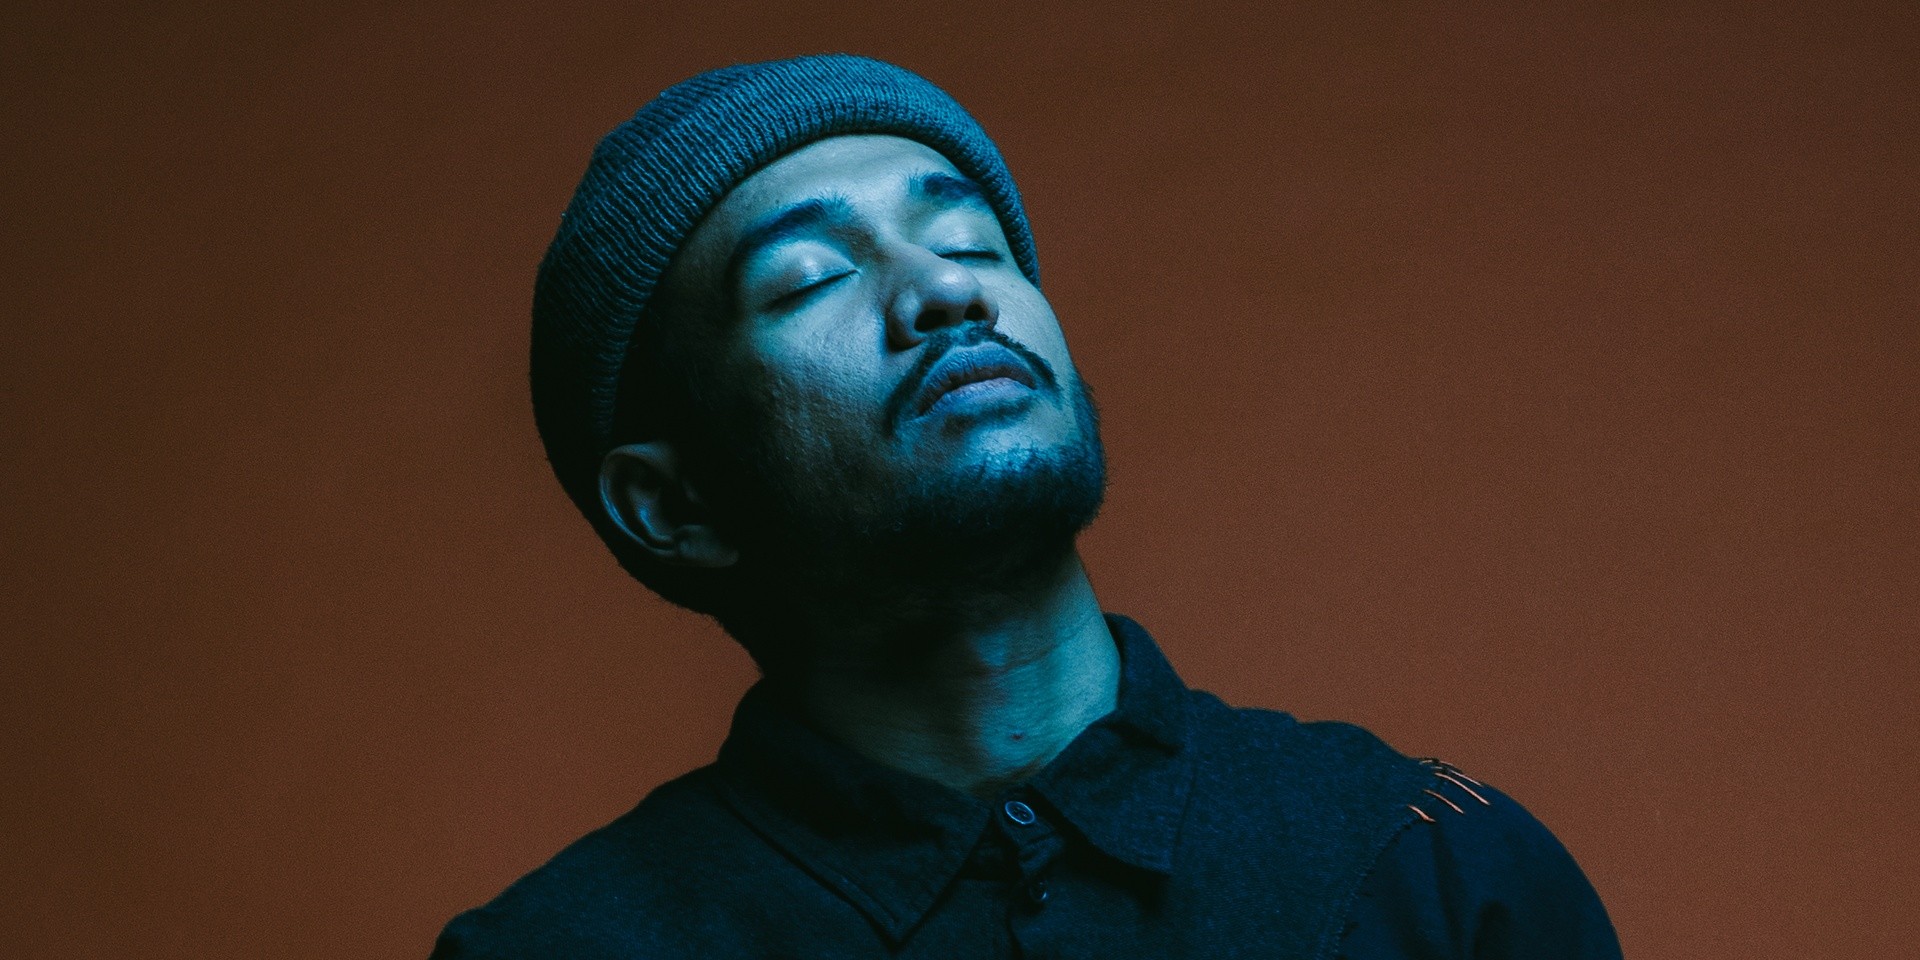 Introducing: Indonesia's Teddy Adhitya on answering the question marks of life through his soulful tunes